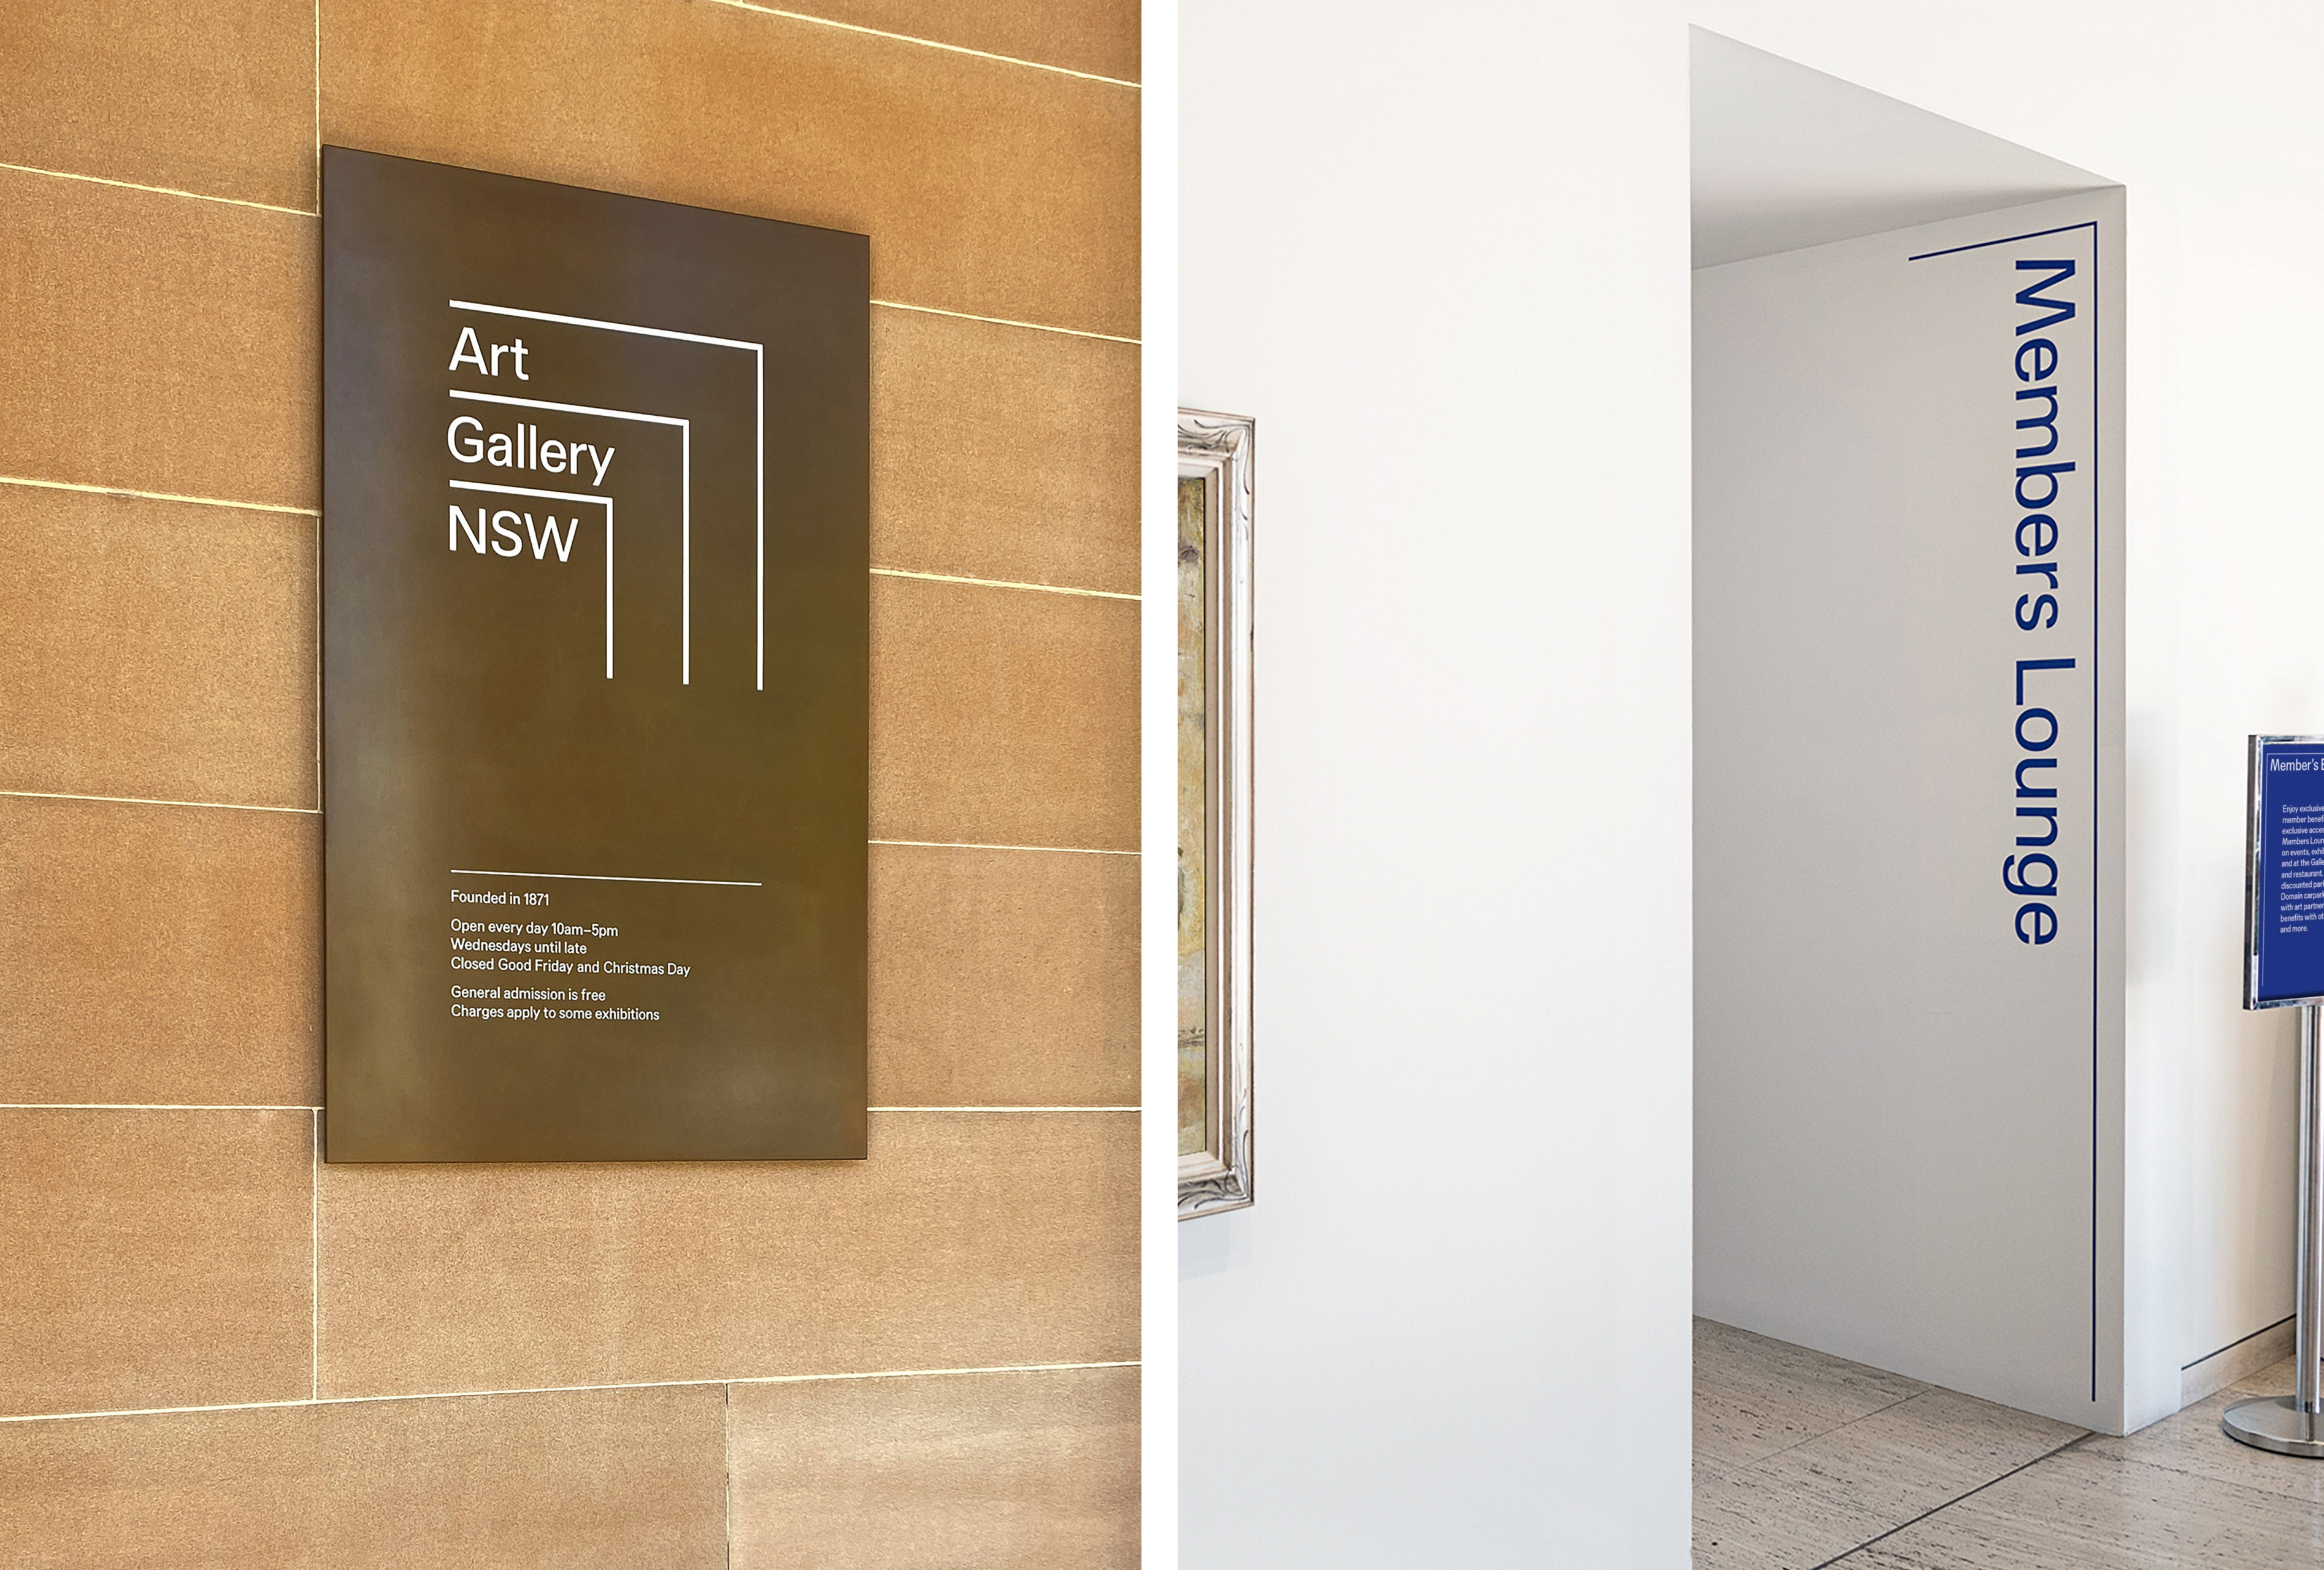 Brand identity, signage and wayfinding for Art Gallery of NSW designed by Mucho